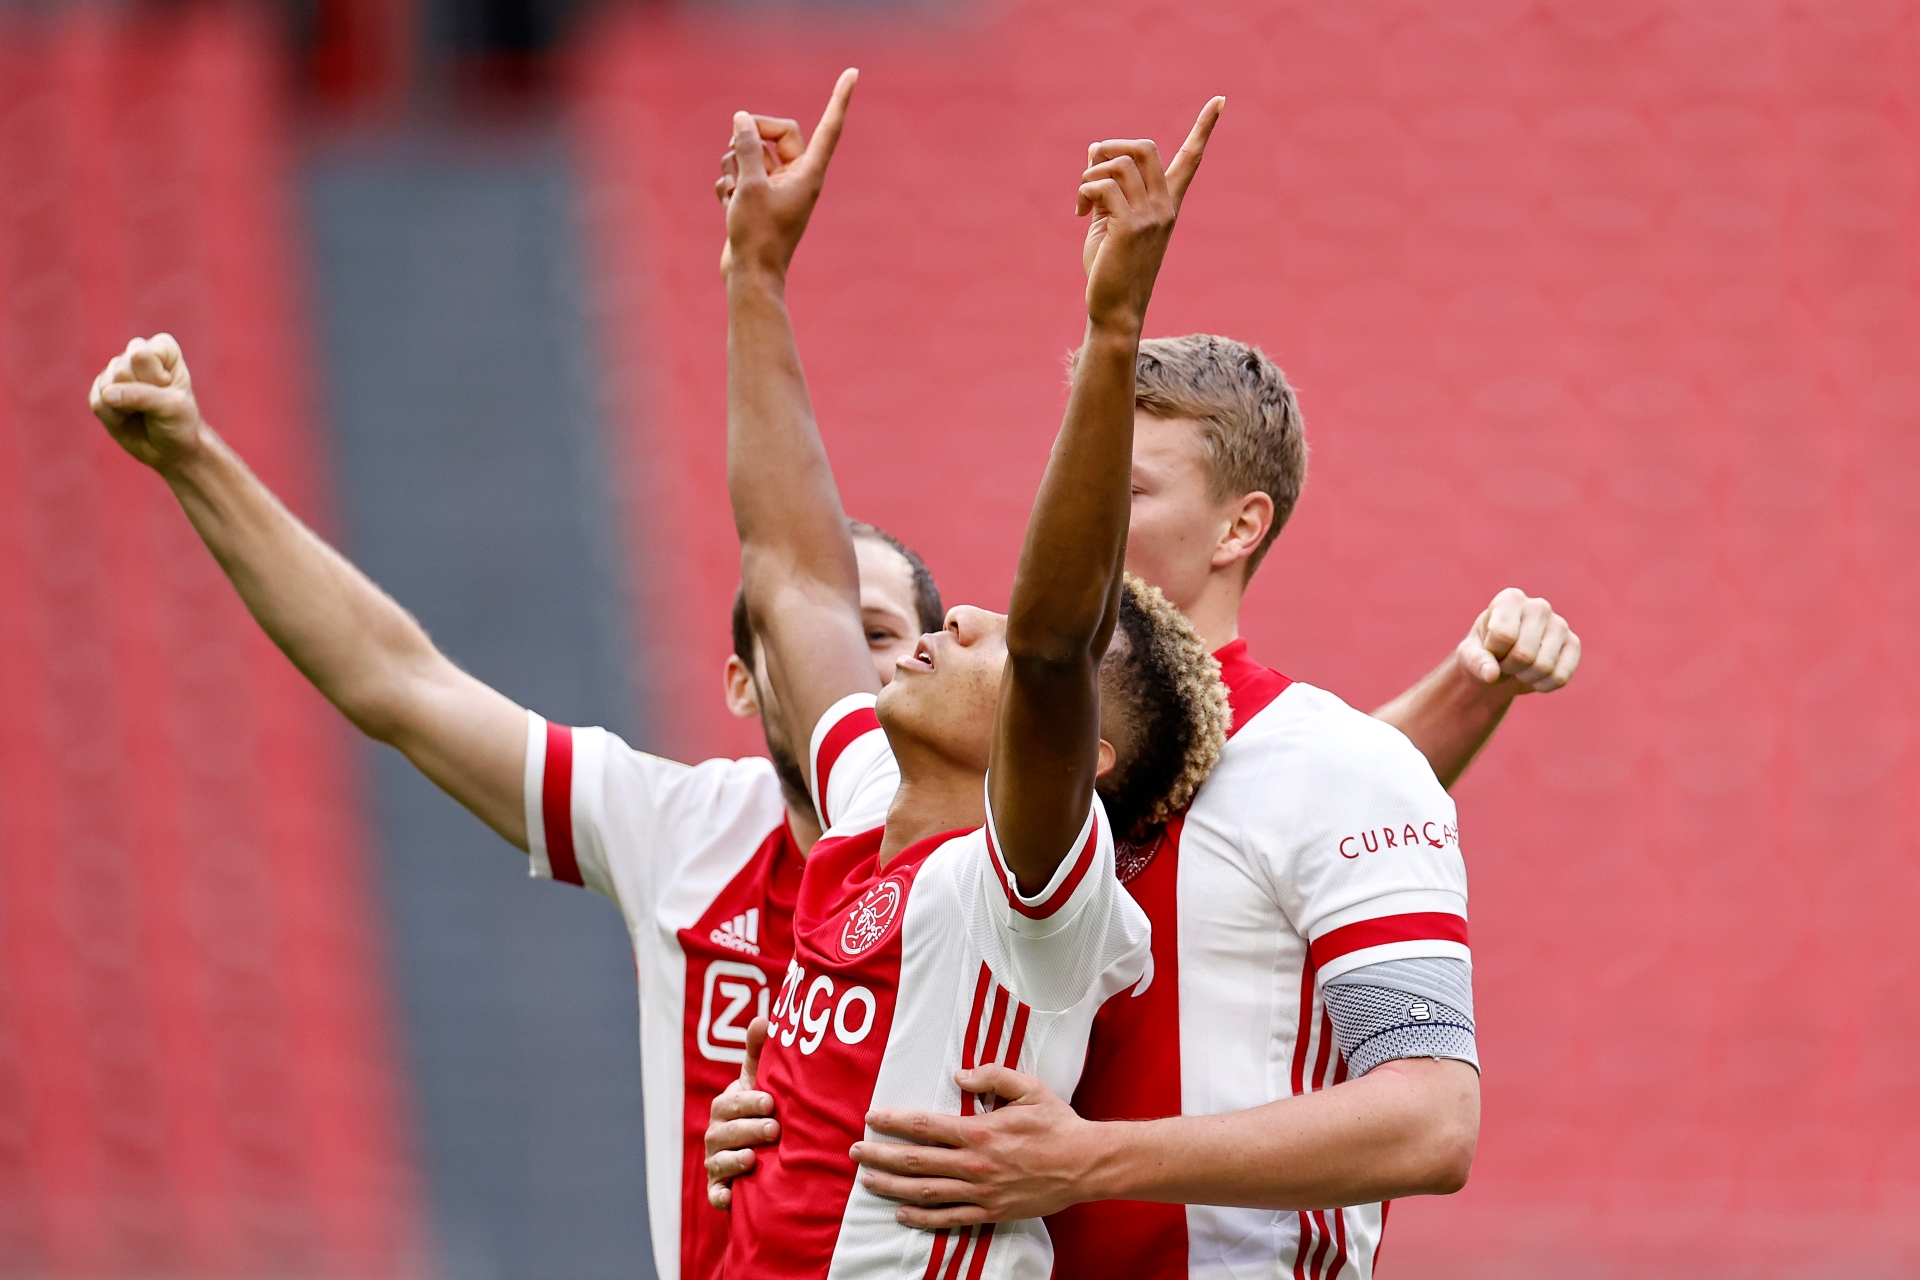 Ajax winger David Neres raises his arms as he celebrates scoring Ajax's second goal with team-mates Daley Blind and Per Schuurs.